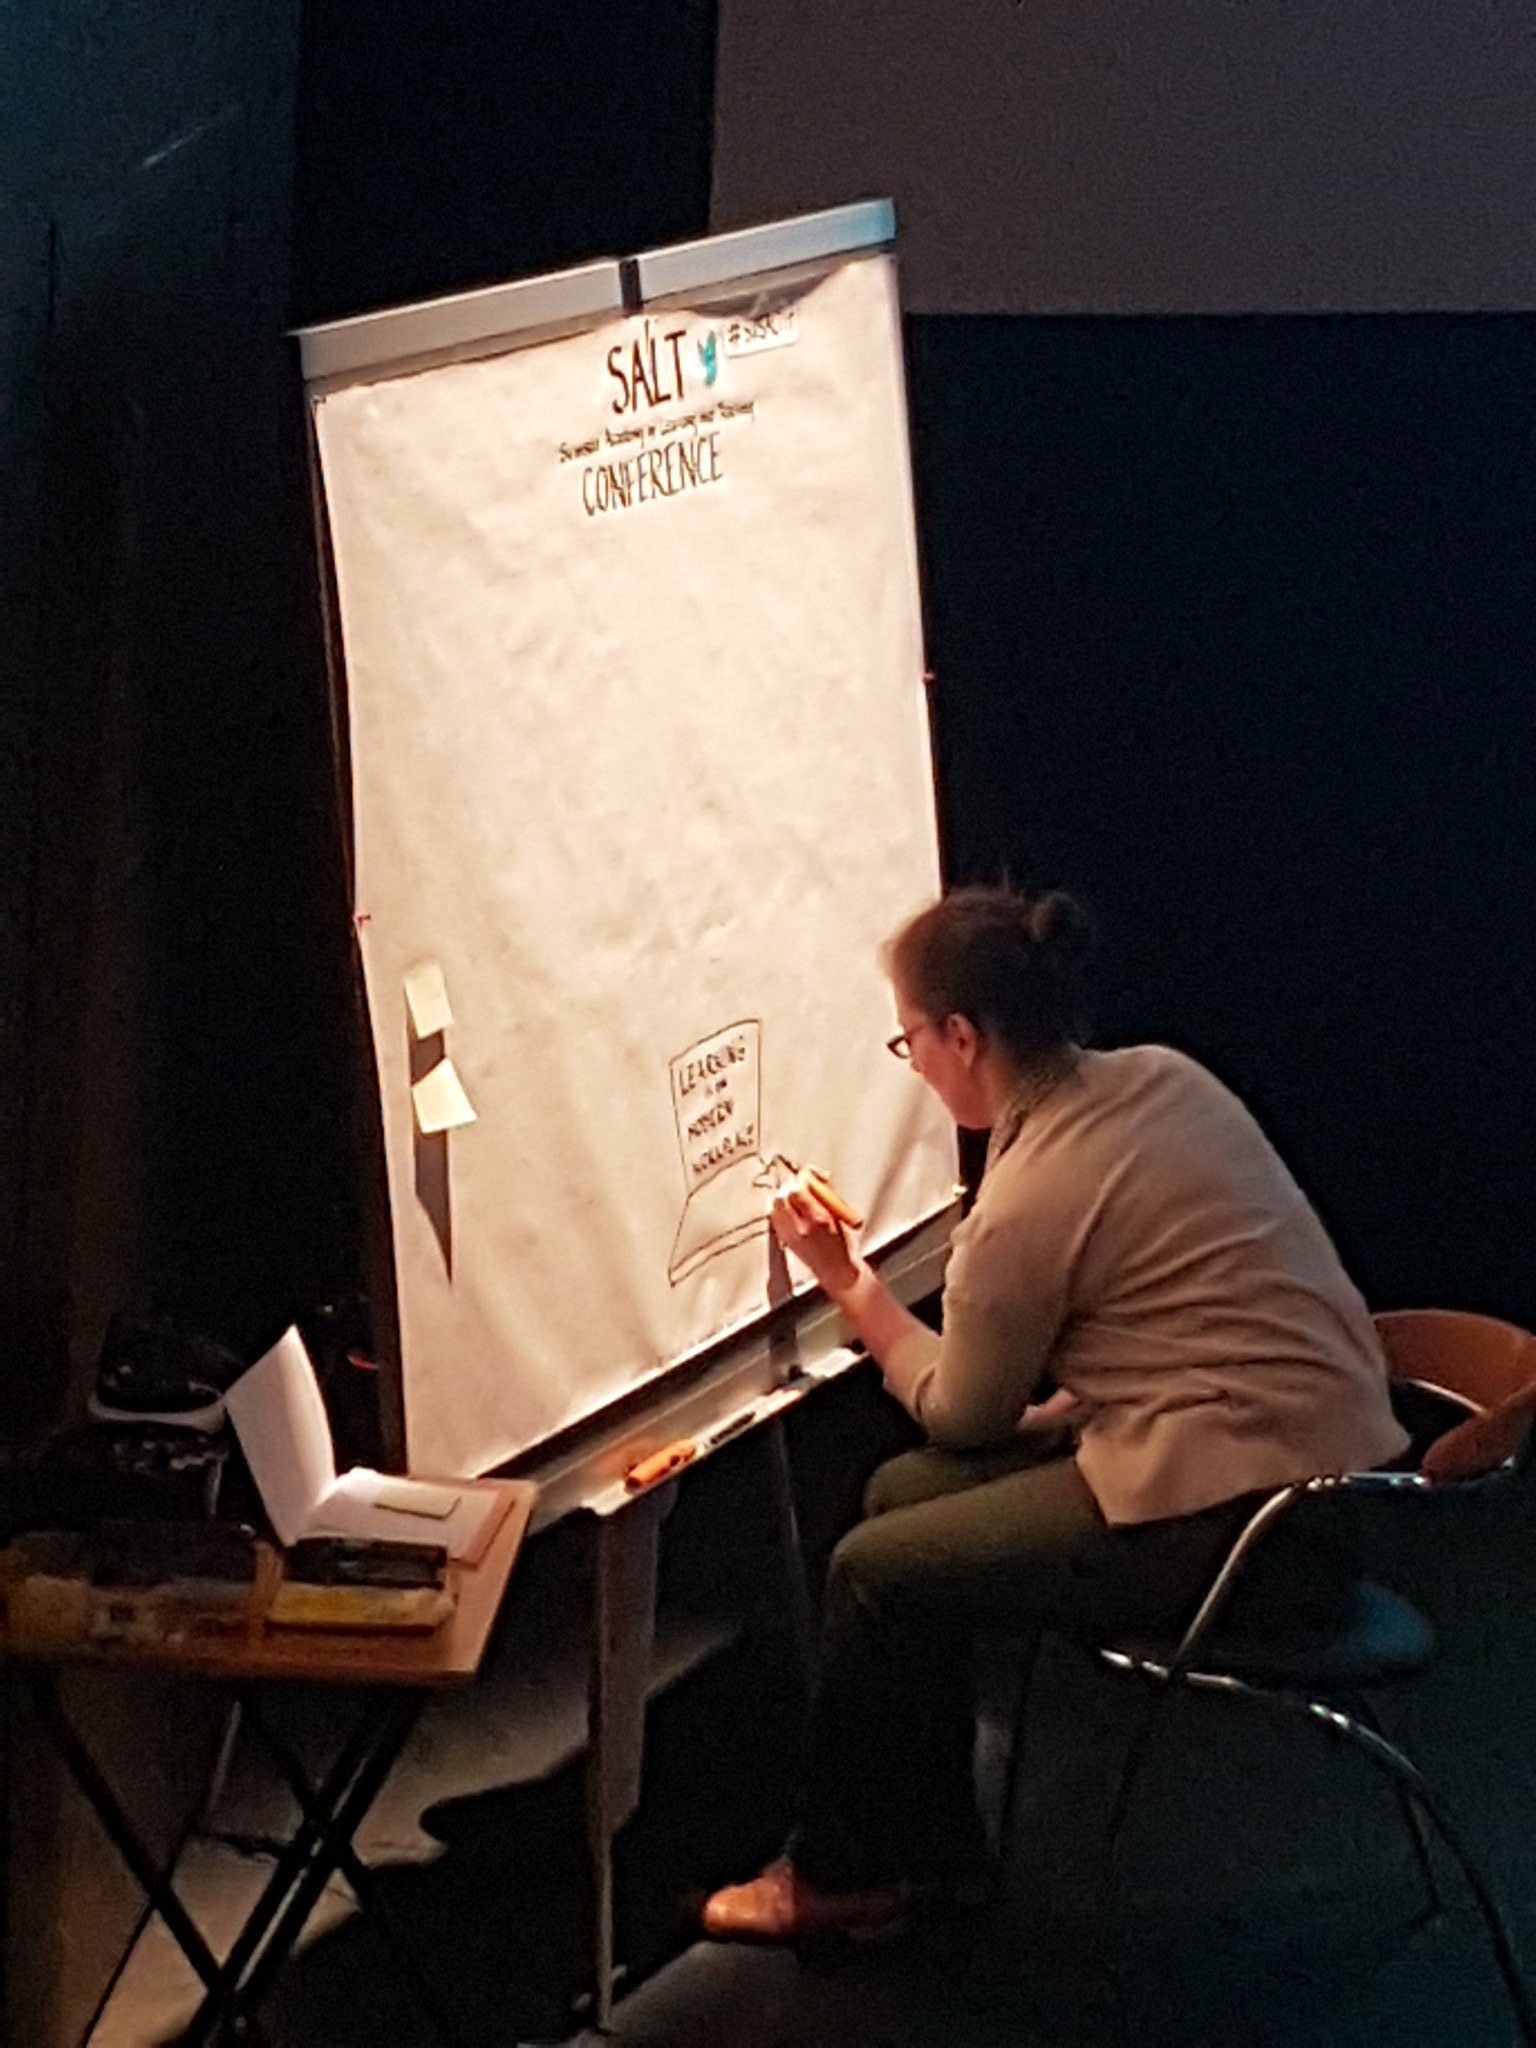 Trying out innovation at #susalt17. Graphical recording https://t.co/aJbyXDzBnp